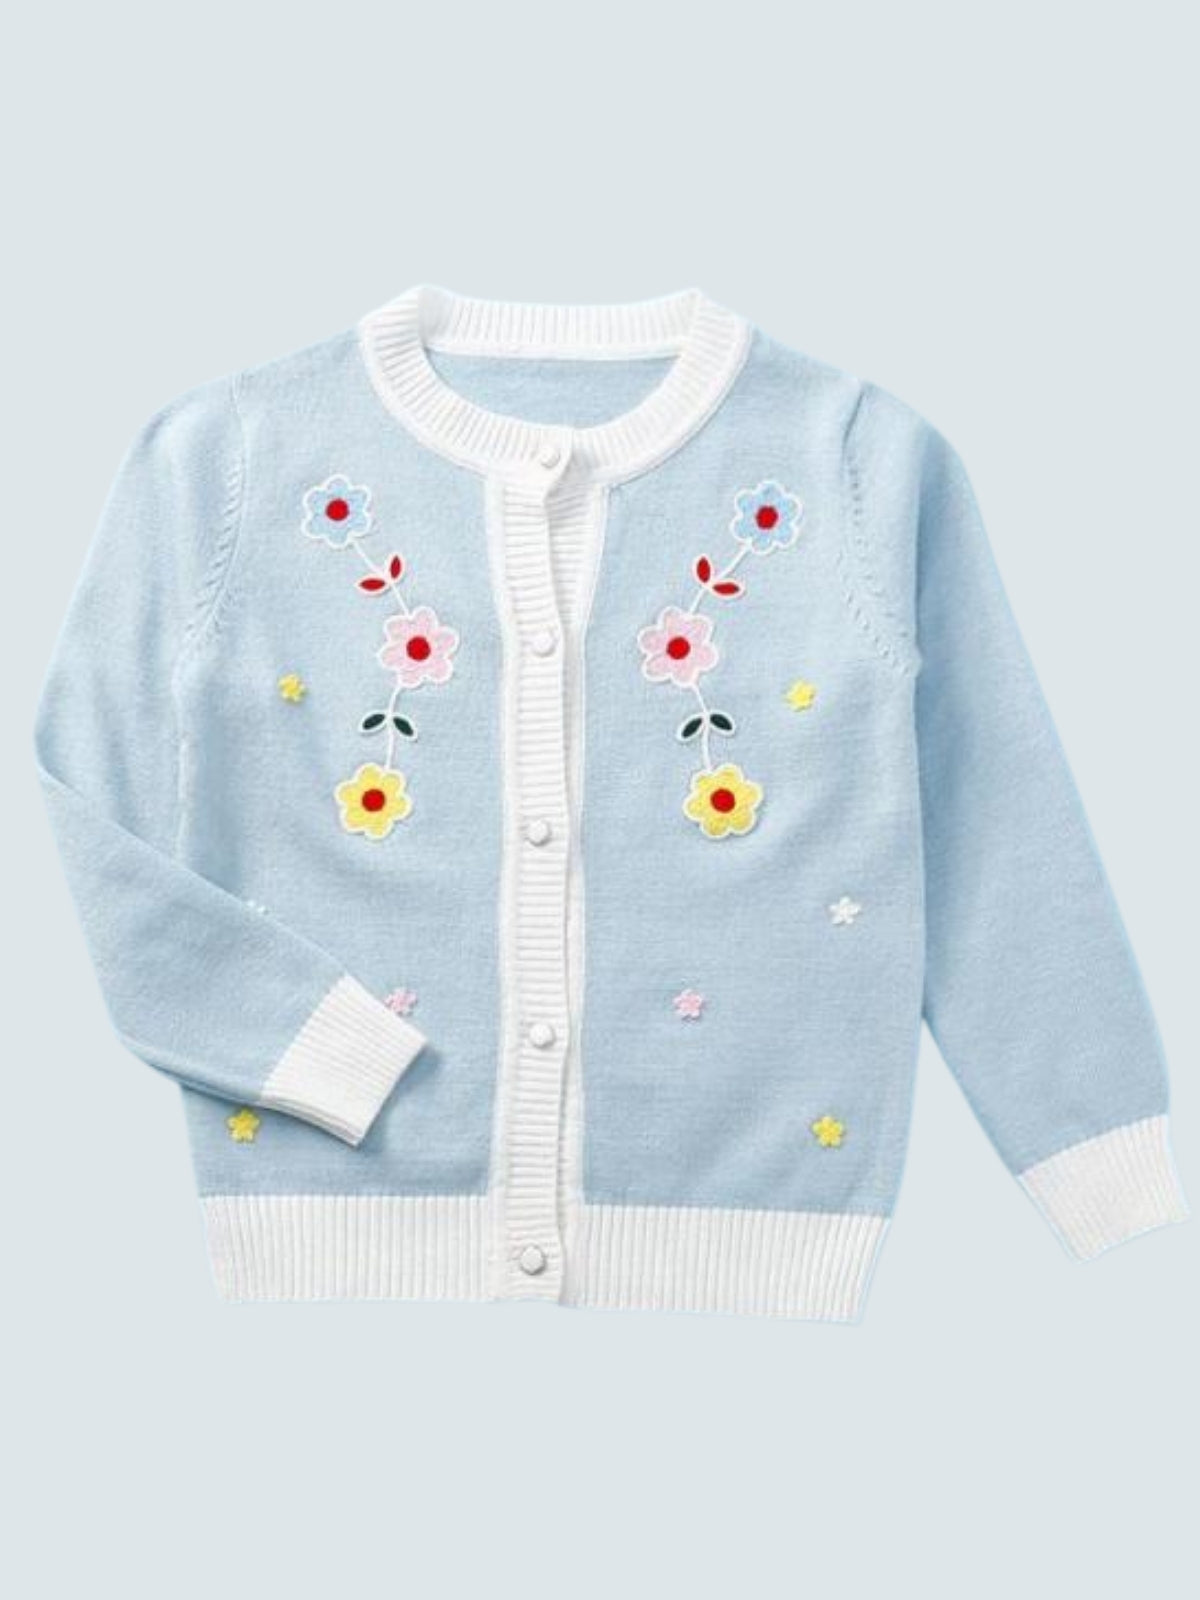 Girls Knit Cardigan with Flower Embroidered